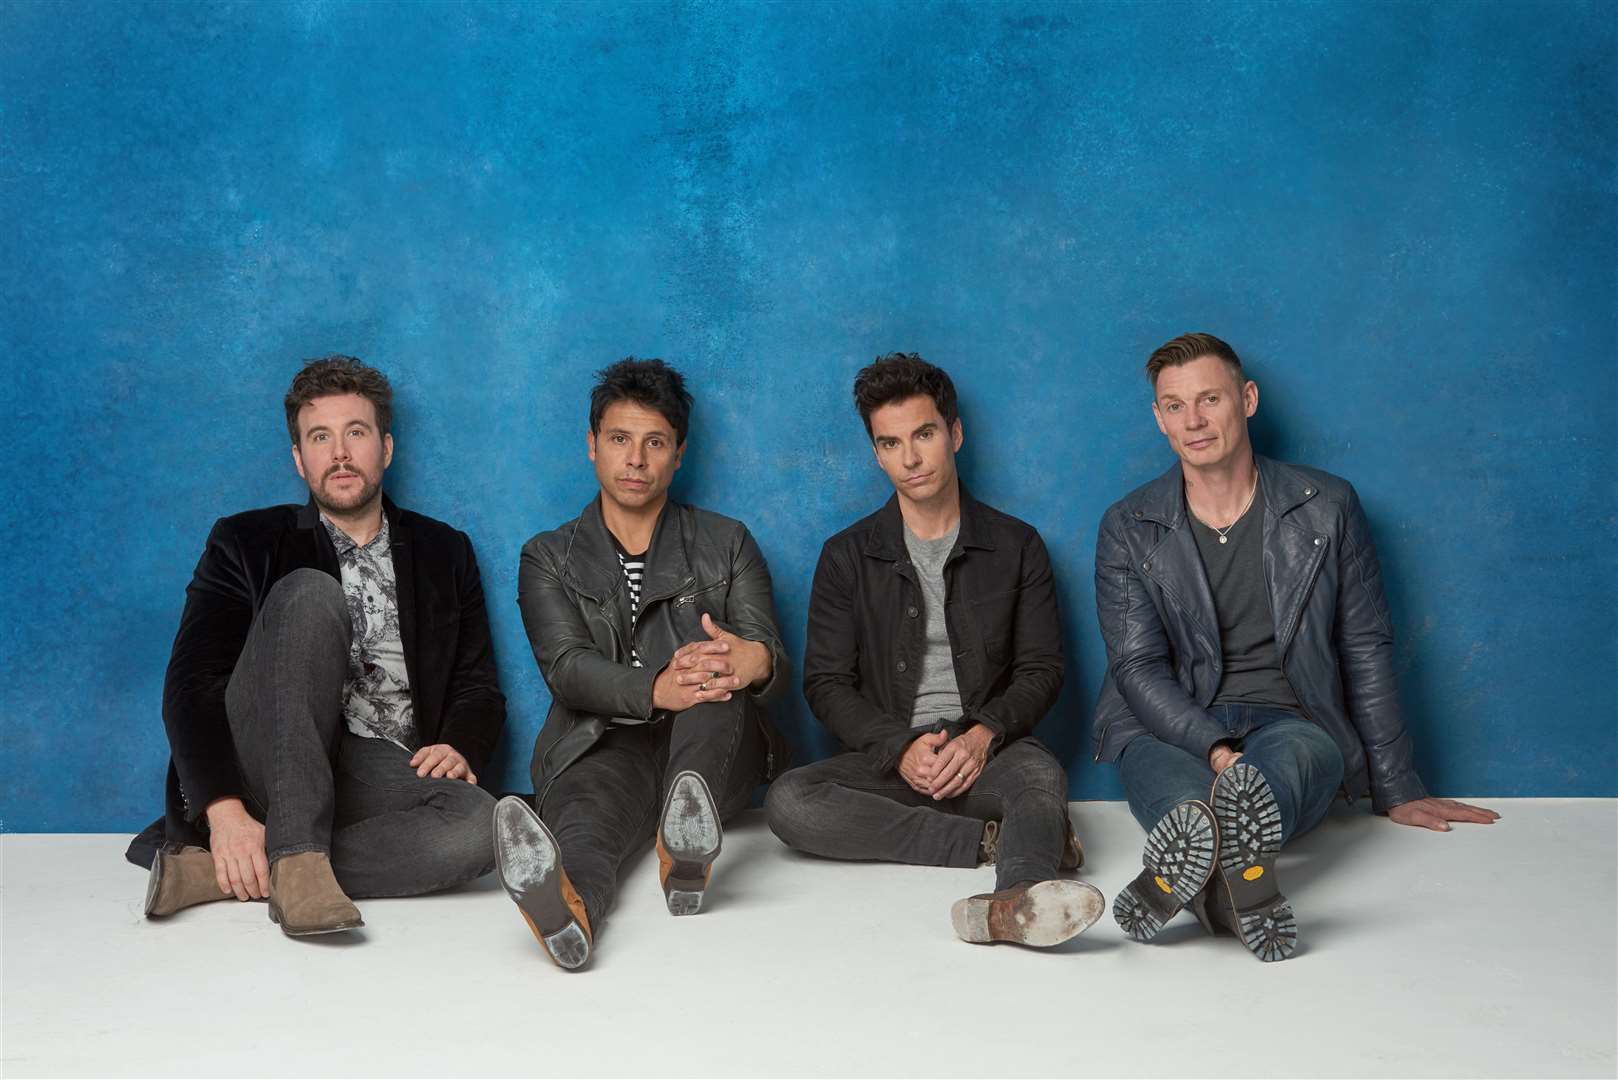 Stereophonics are still due to appear at Bught Park on July 11.